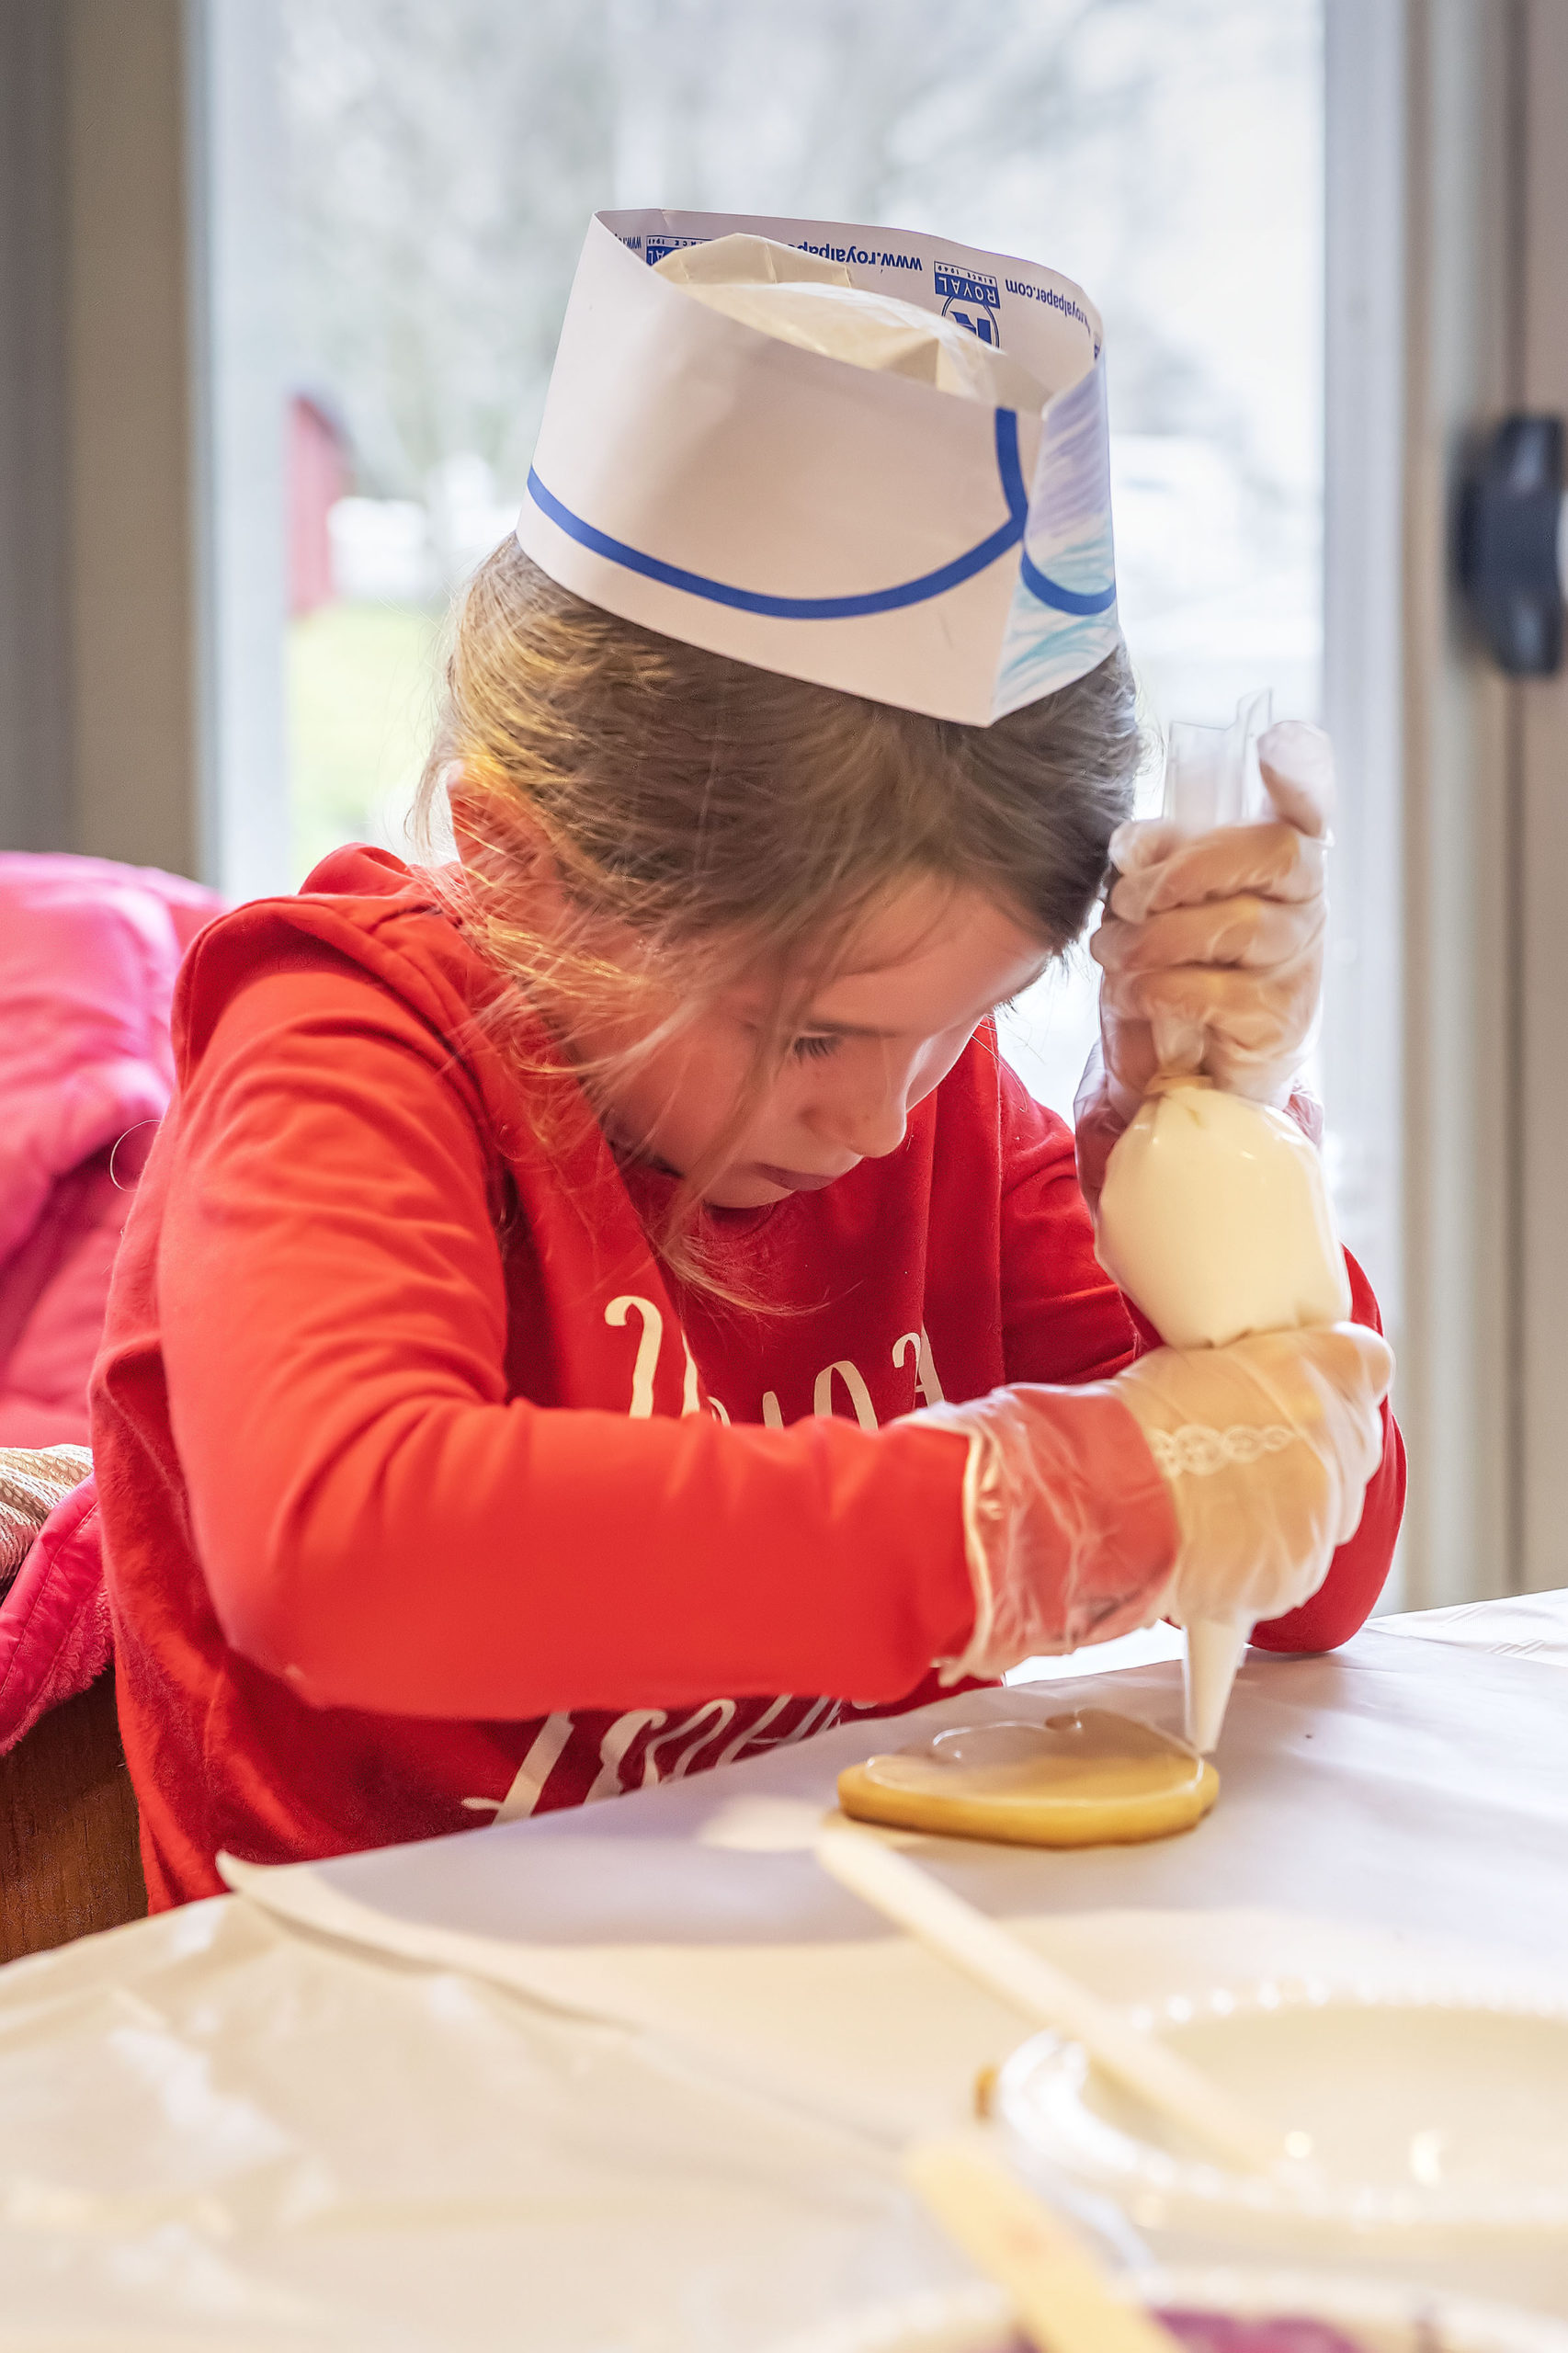 Seven-year-old Abigayle Leland is a study in concentration as she applies some icing during a Football Jersey Cookie Decorating Workshop that was held at the John Jermain Library on Saturday.   MICHAEL HELLER